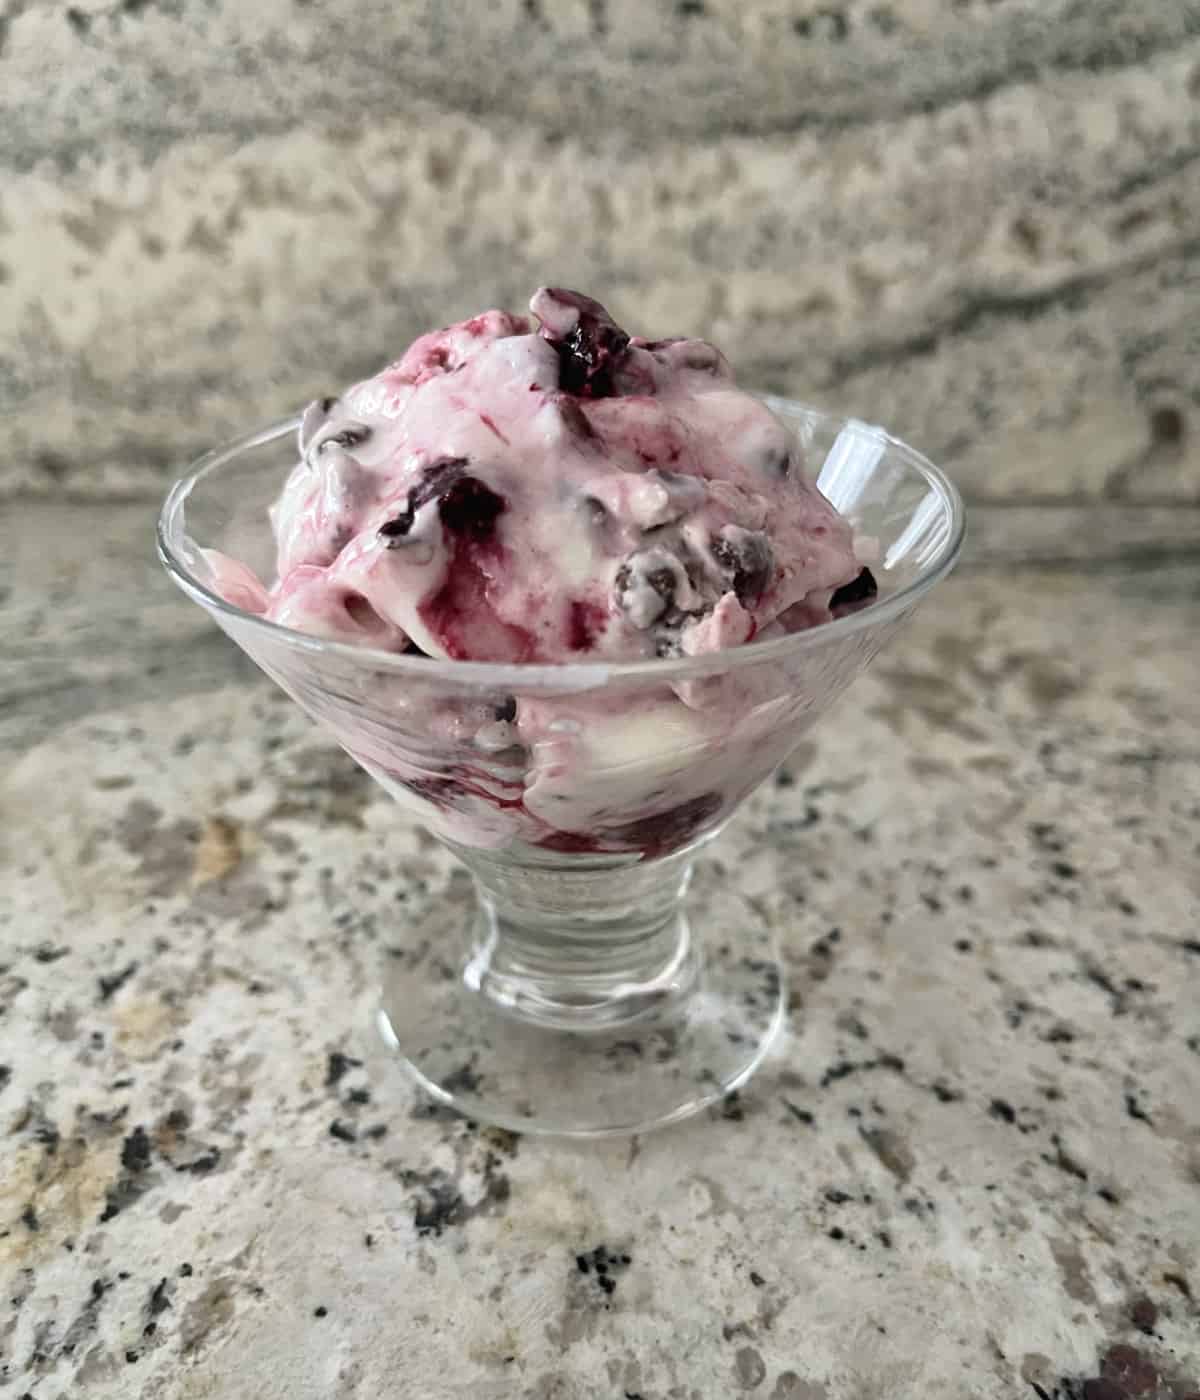 Cherry Chocolate Chip Cottage Cheese Ice Cream in small dessert glass on granite counter.